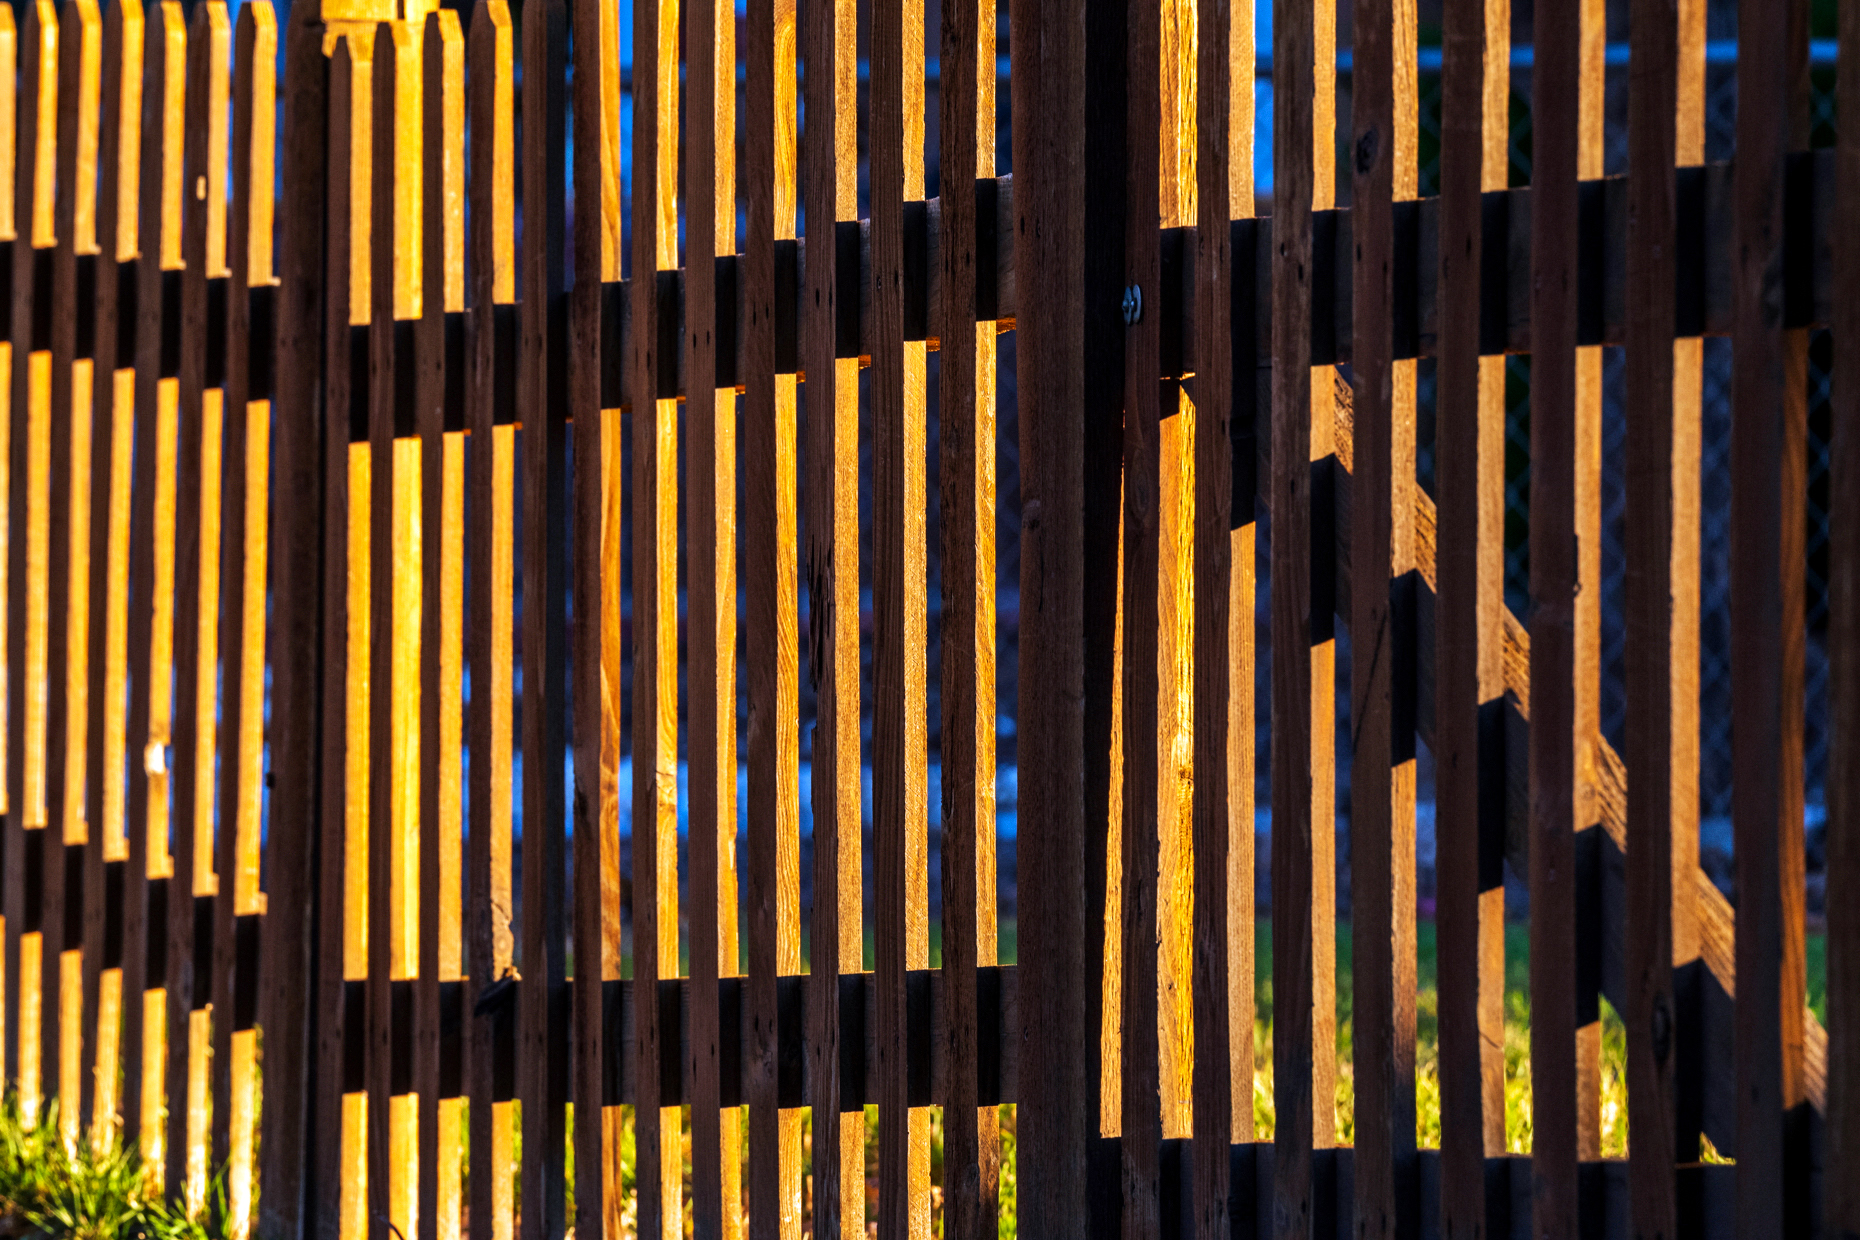 Late day sunlight creates patterns on wooden picket fence; 325 D